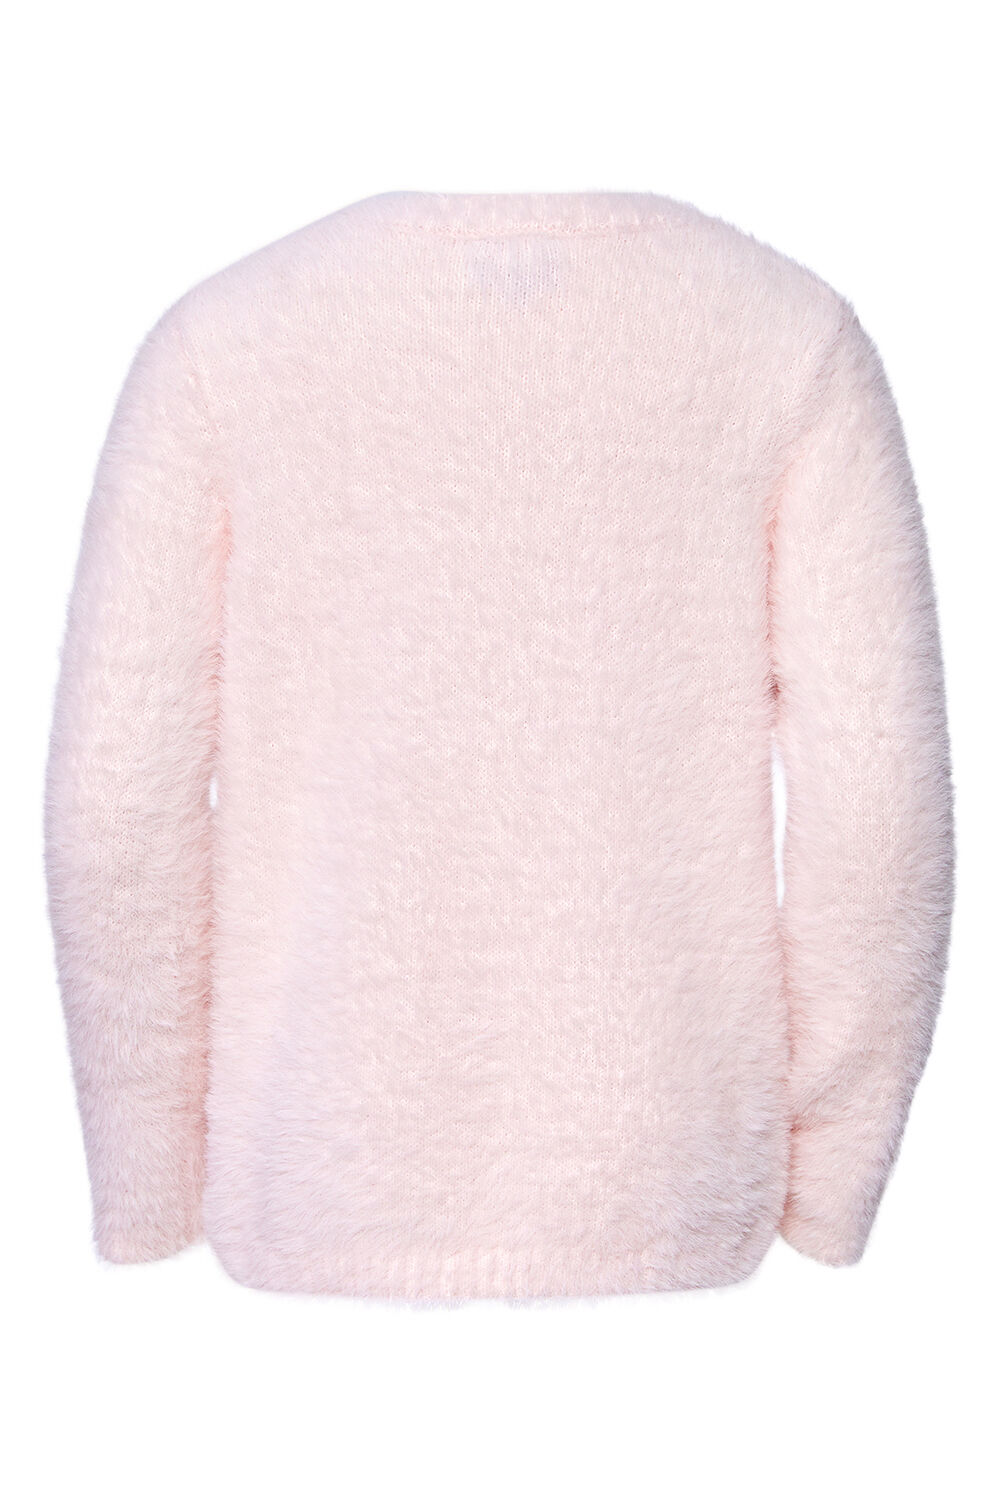 GIRLS FLUFFY BUNNY JUMPER in colour SOFT PINK